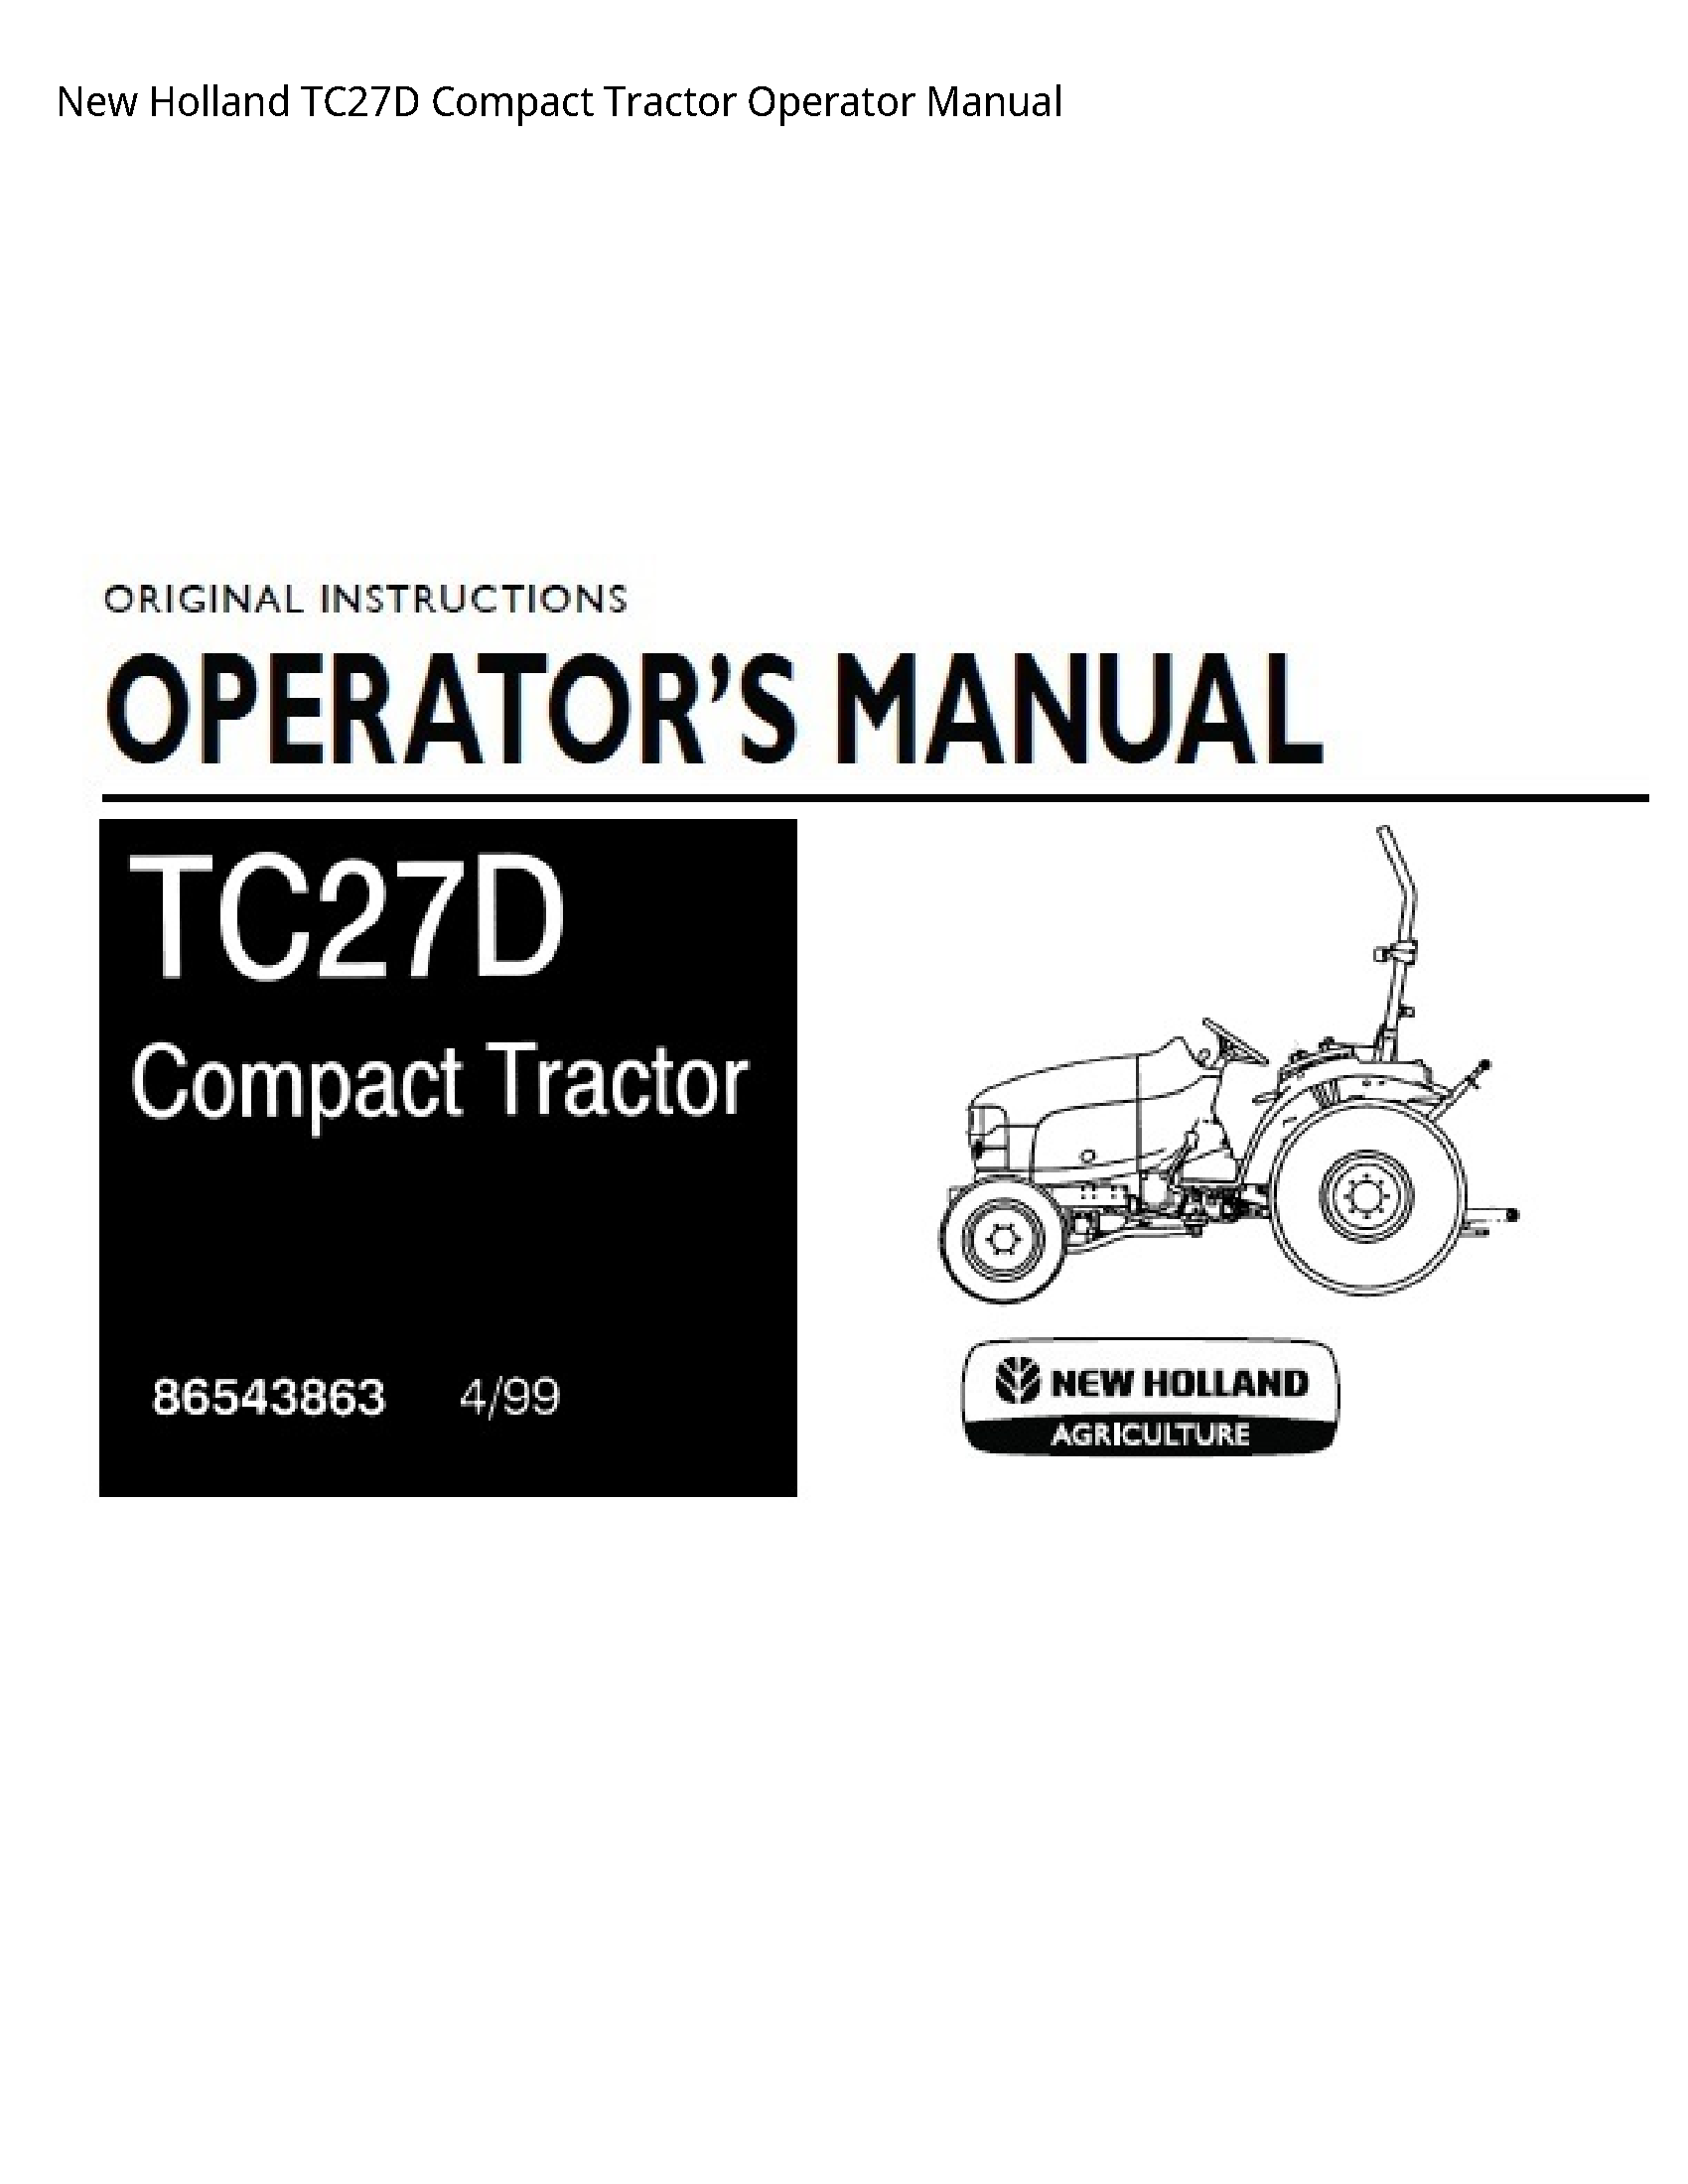 New Holland TC27D Compact Tractor Operator manual